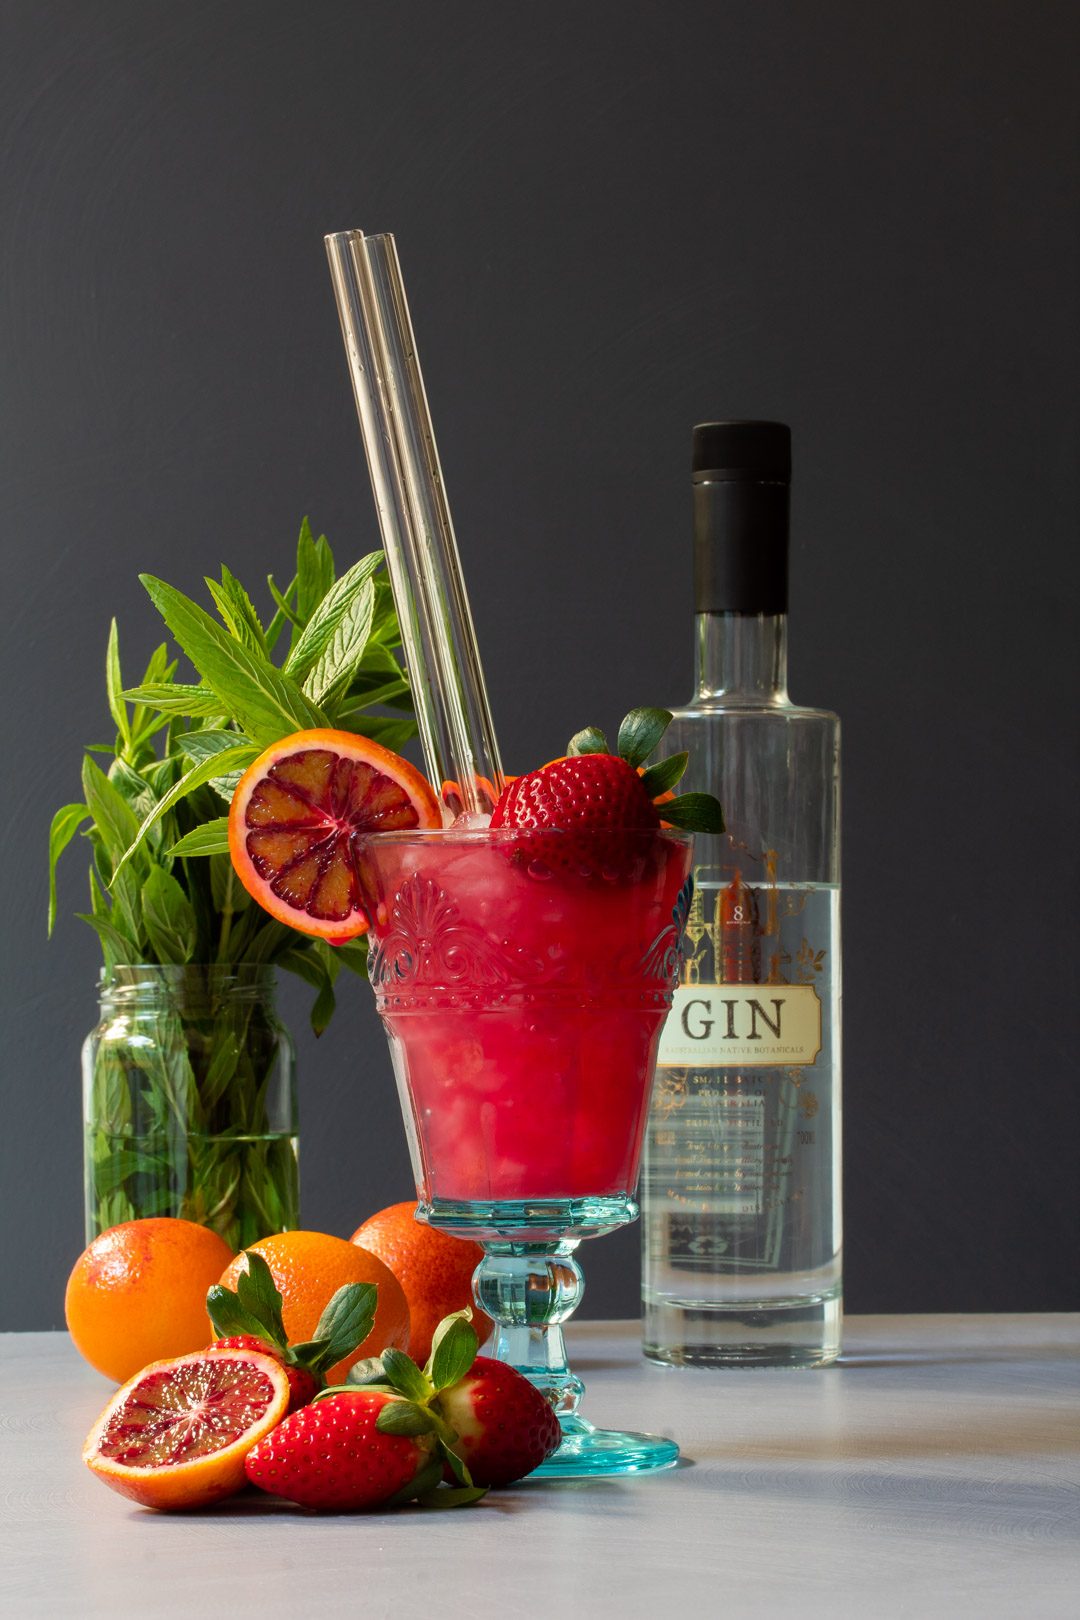 blood orange pomegranate gin daisy cocktail with mint and gin bottle in background